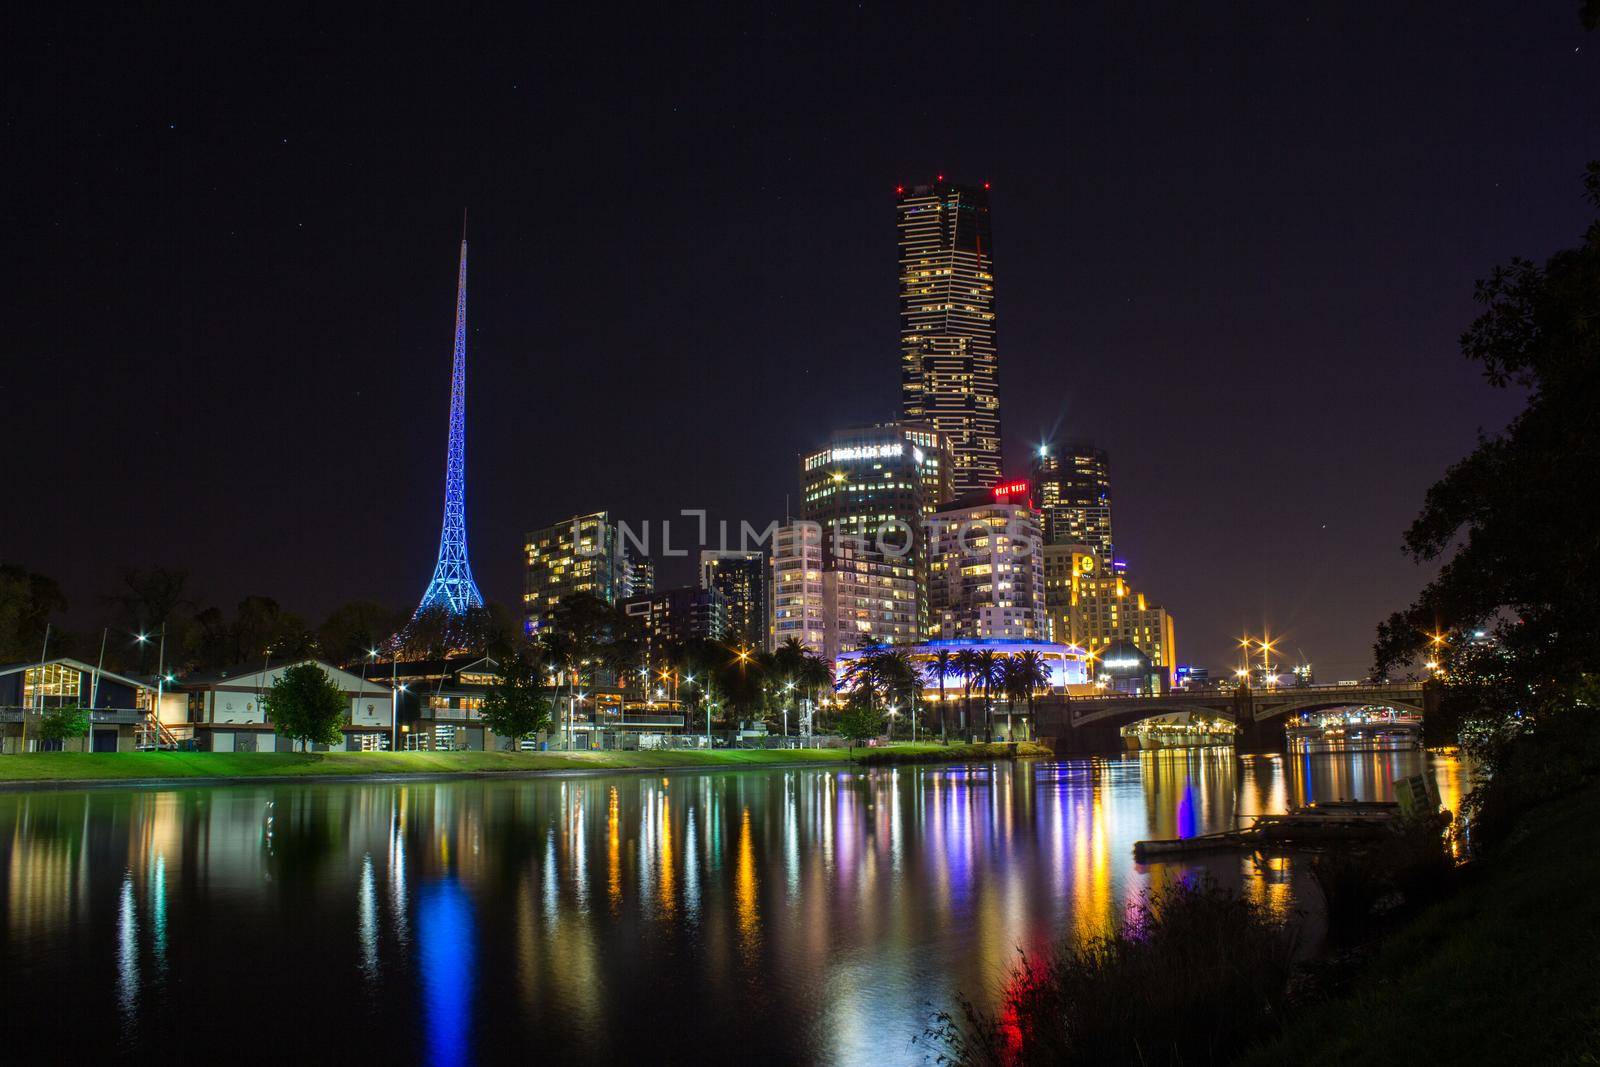 Modern skyscraper in Melbourne at night by bettercallcurry